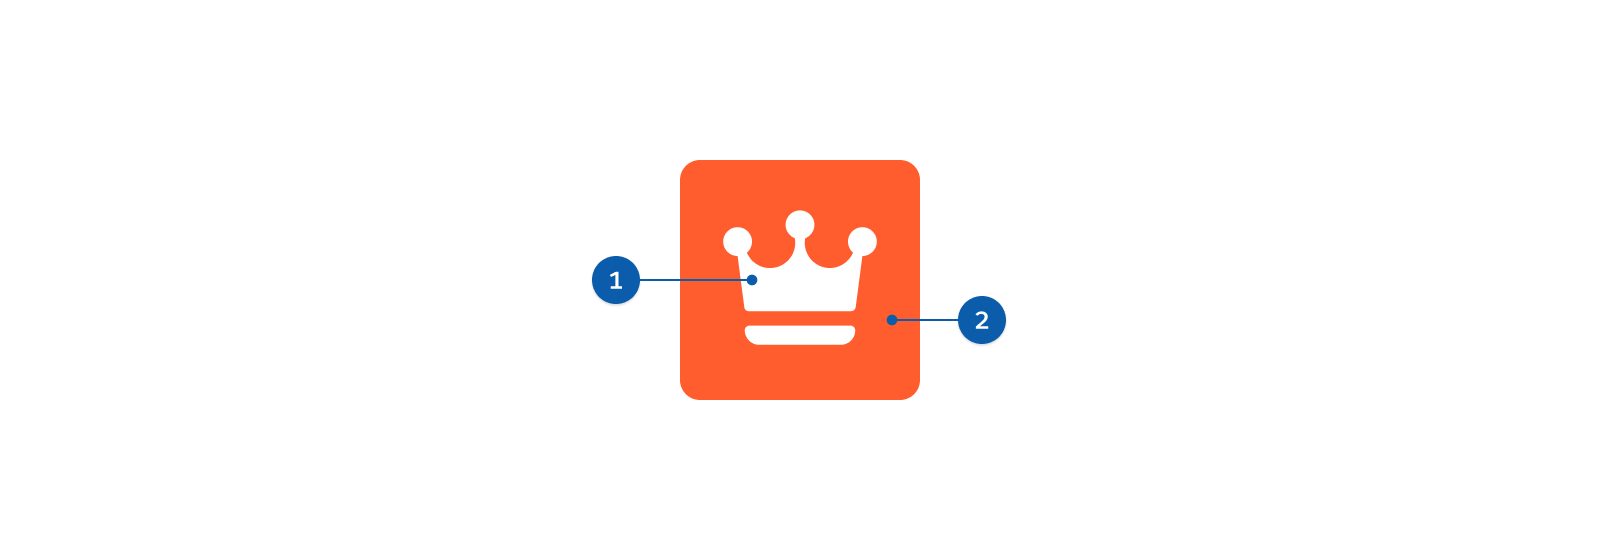 An image of a white crown glyph on an orange square on a white background, illustrating adjacent colors.